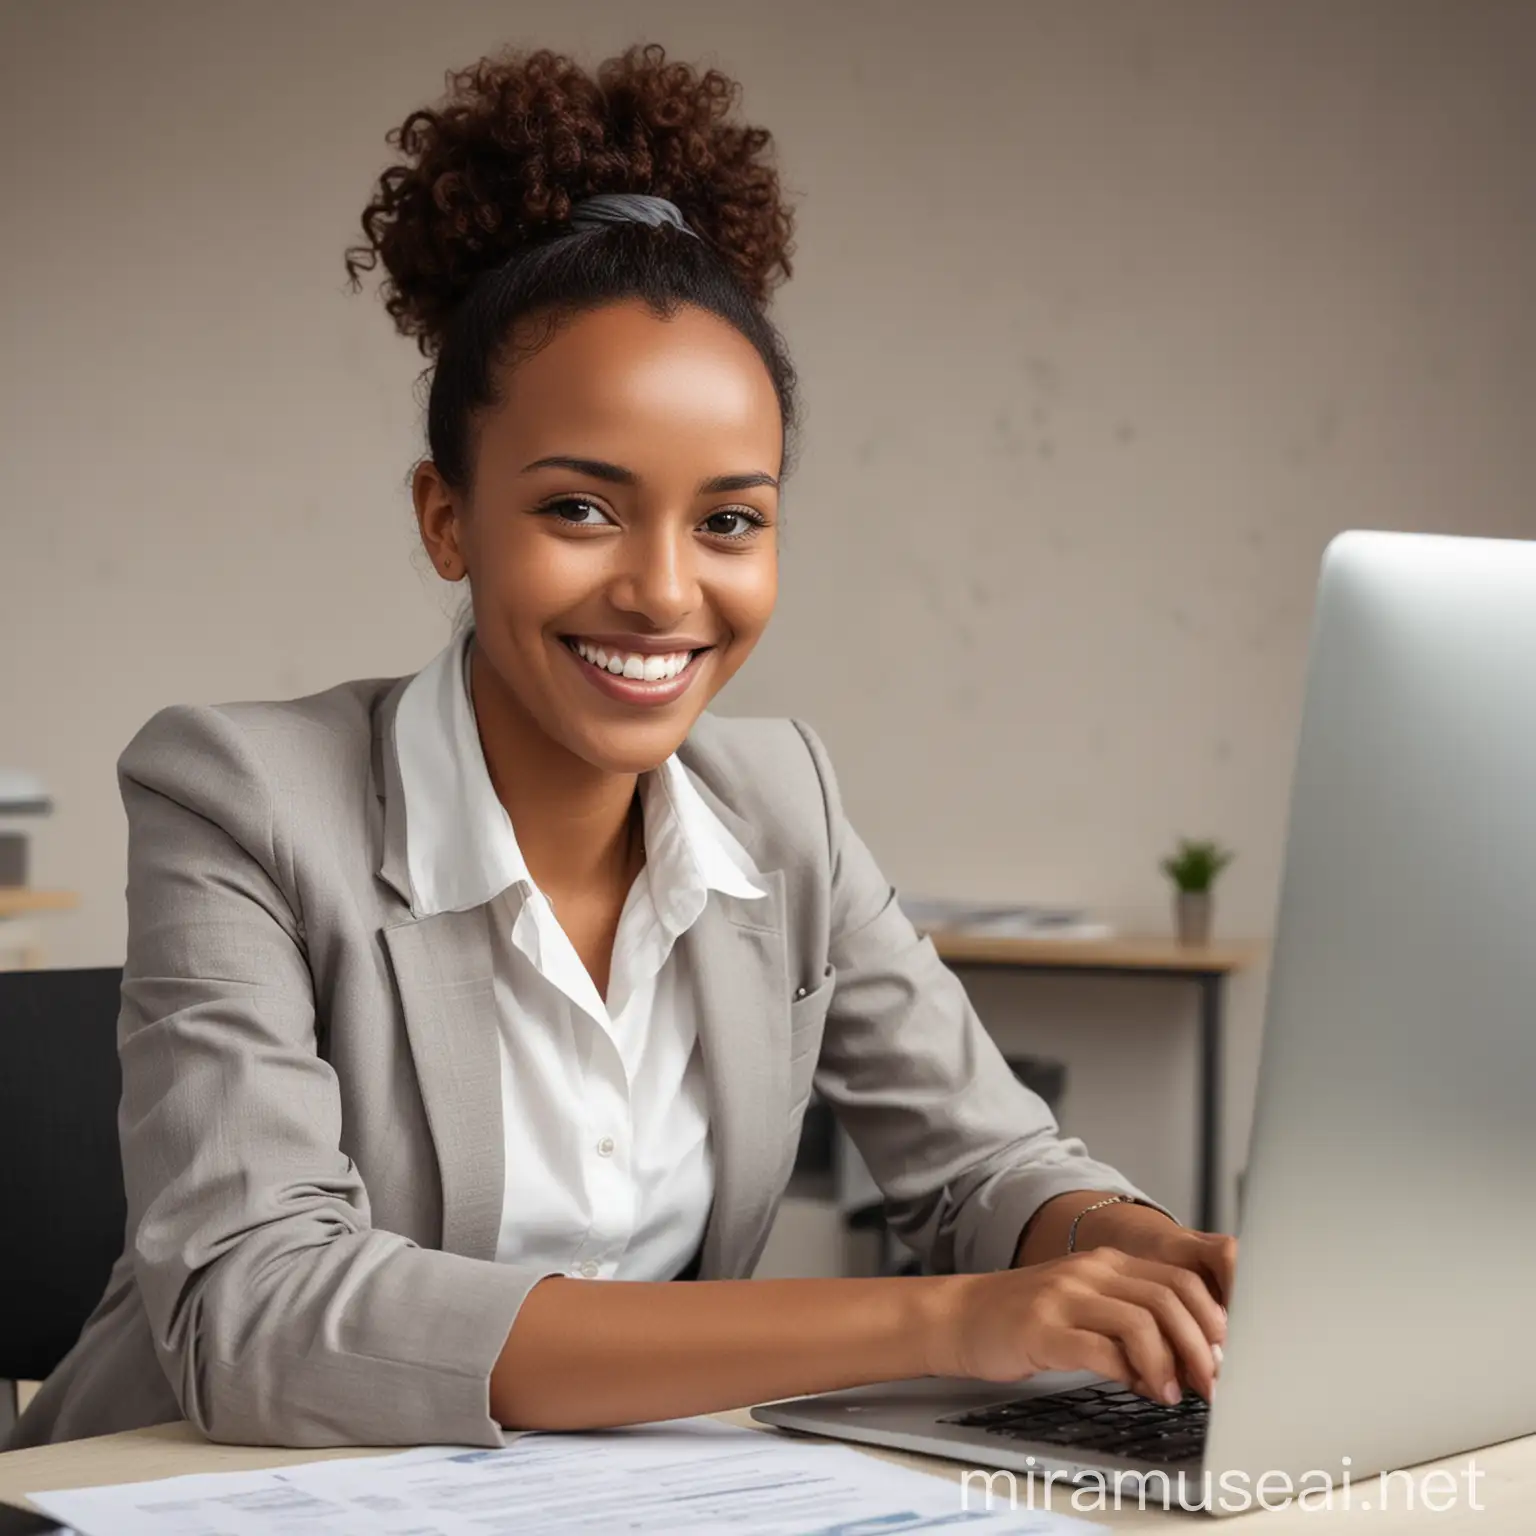 An ethiopian hr recruing woman happly smilling at a computer, dressing proffesionally and also checking applicants cv